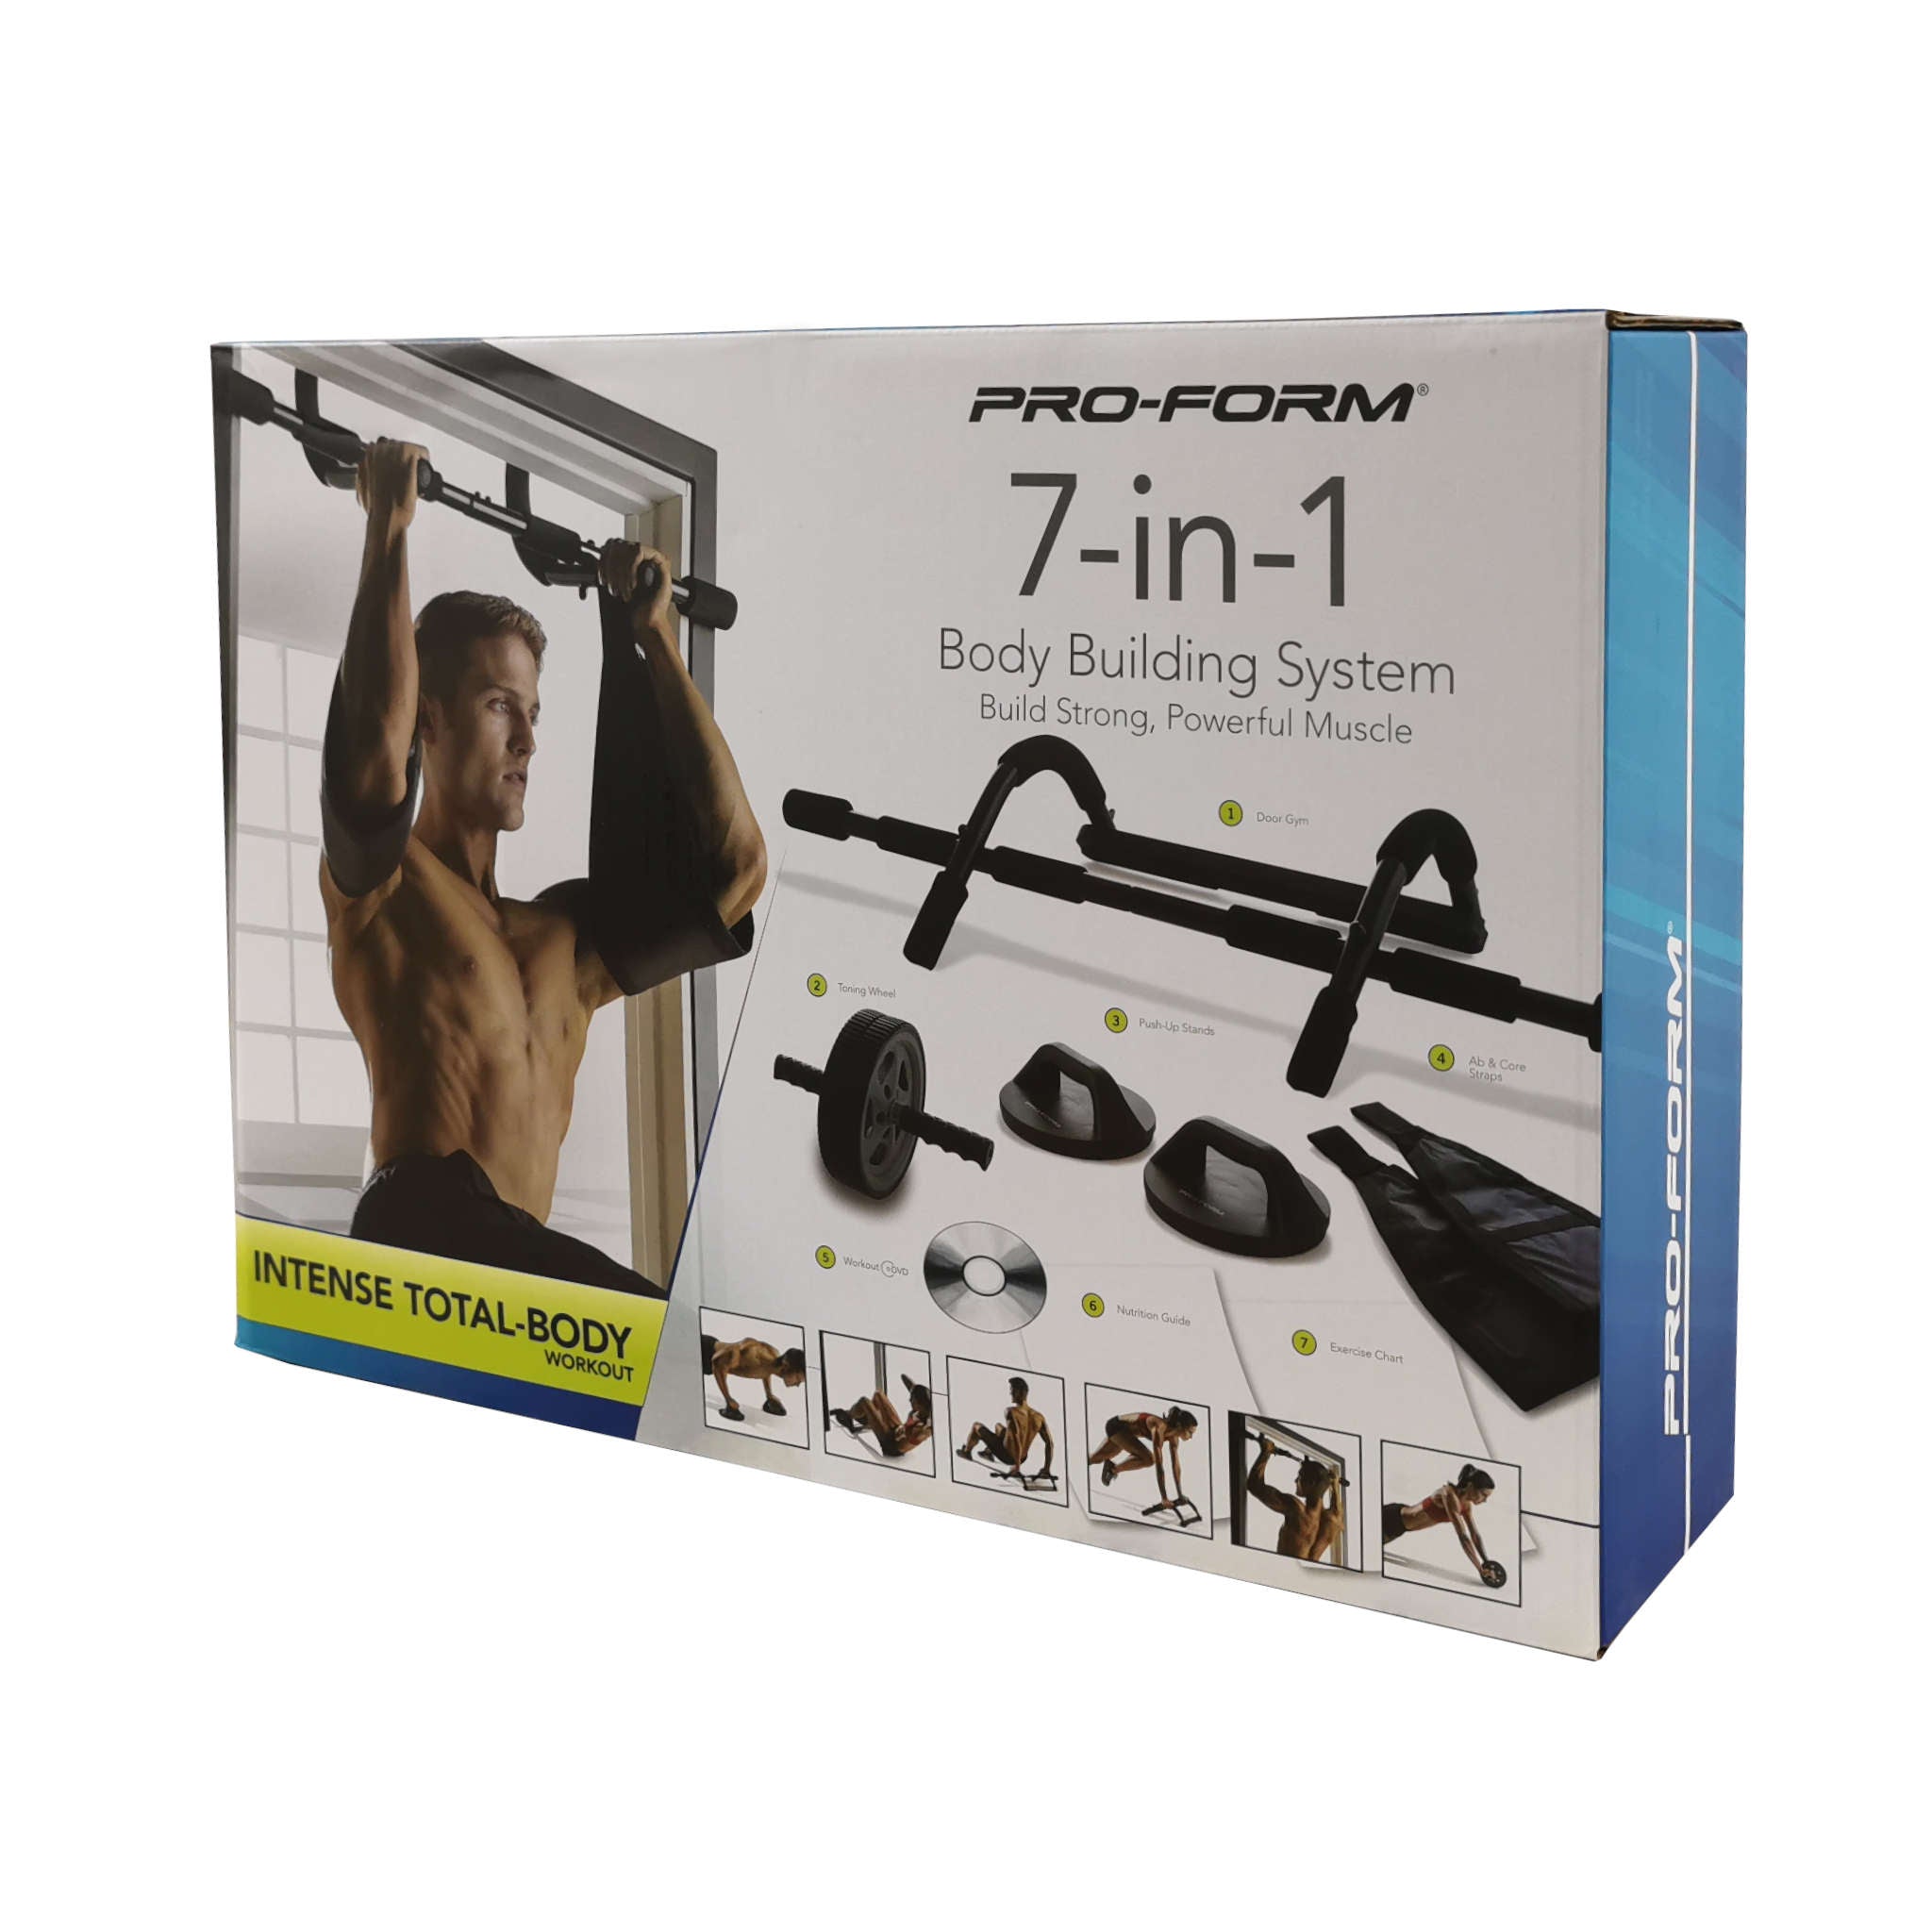 Pro-Form 7-in-1 Body Building Workout System